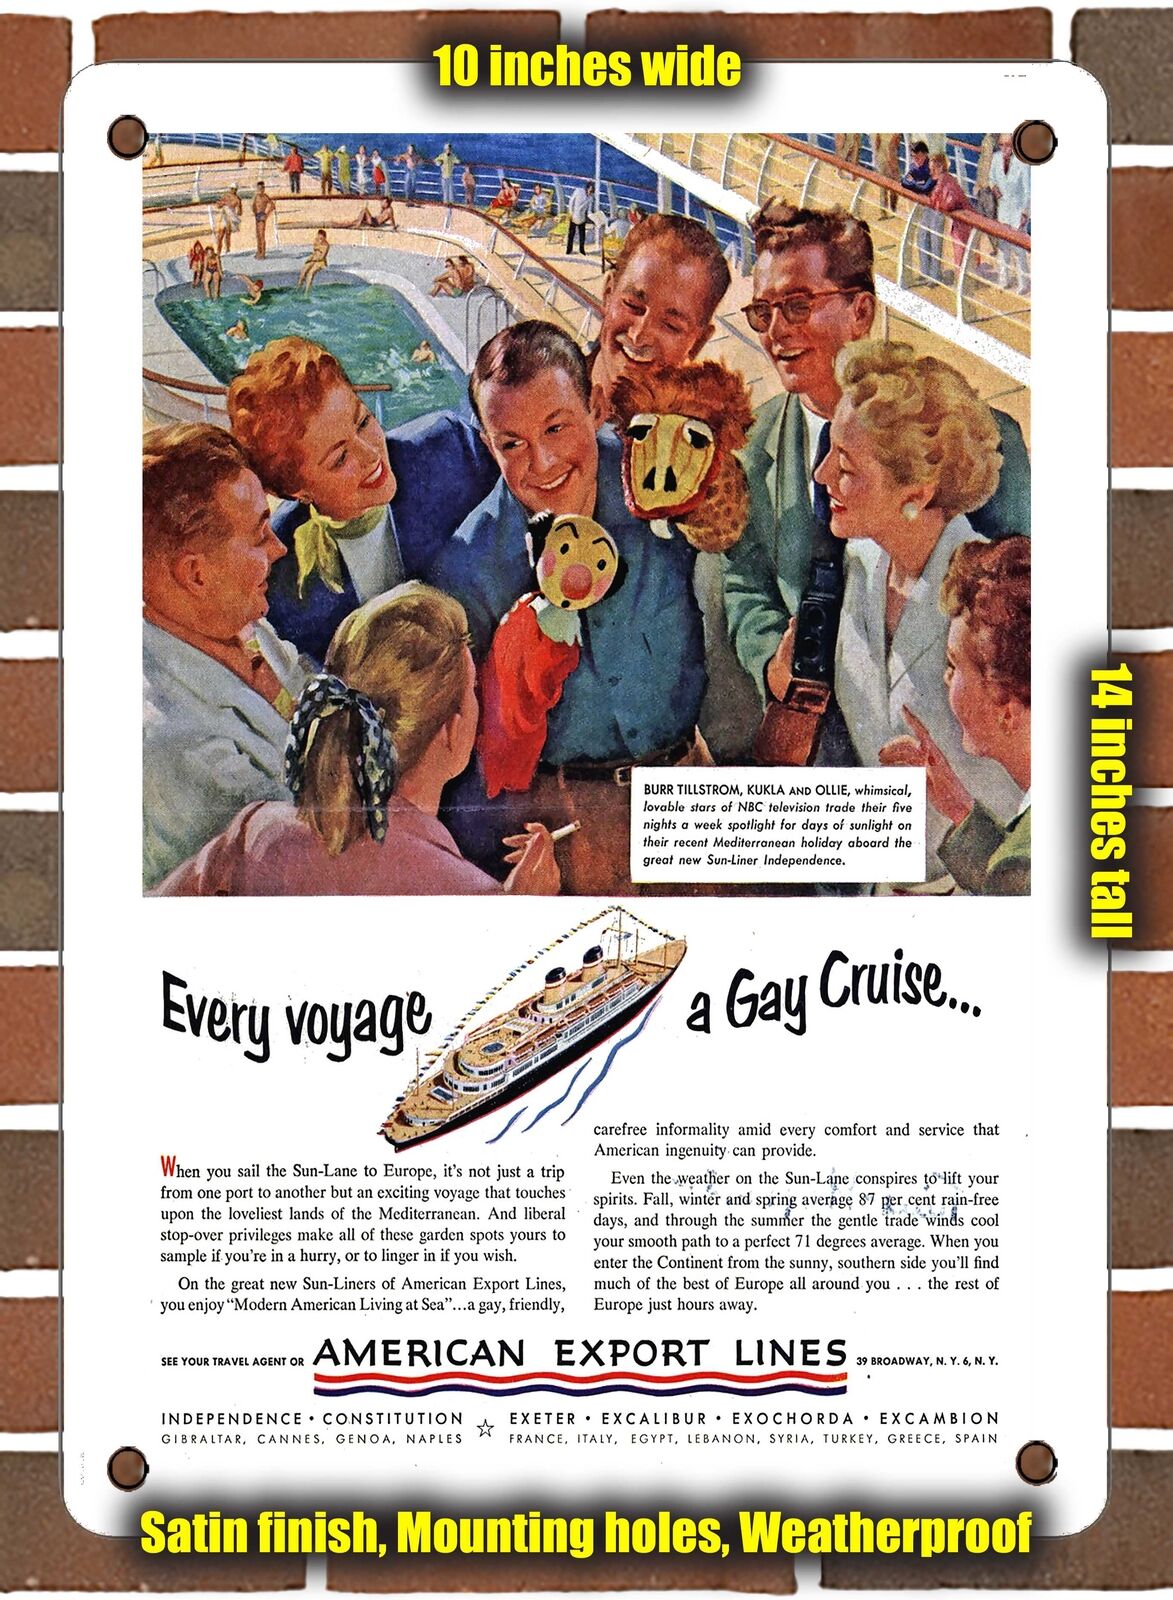 METAL SIGN - 1952 Every Voyage a Gay Cruise. American Export Lines - 10x14\